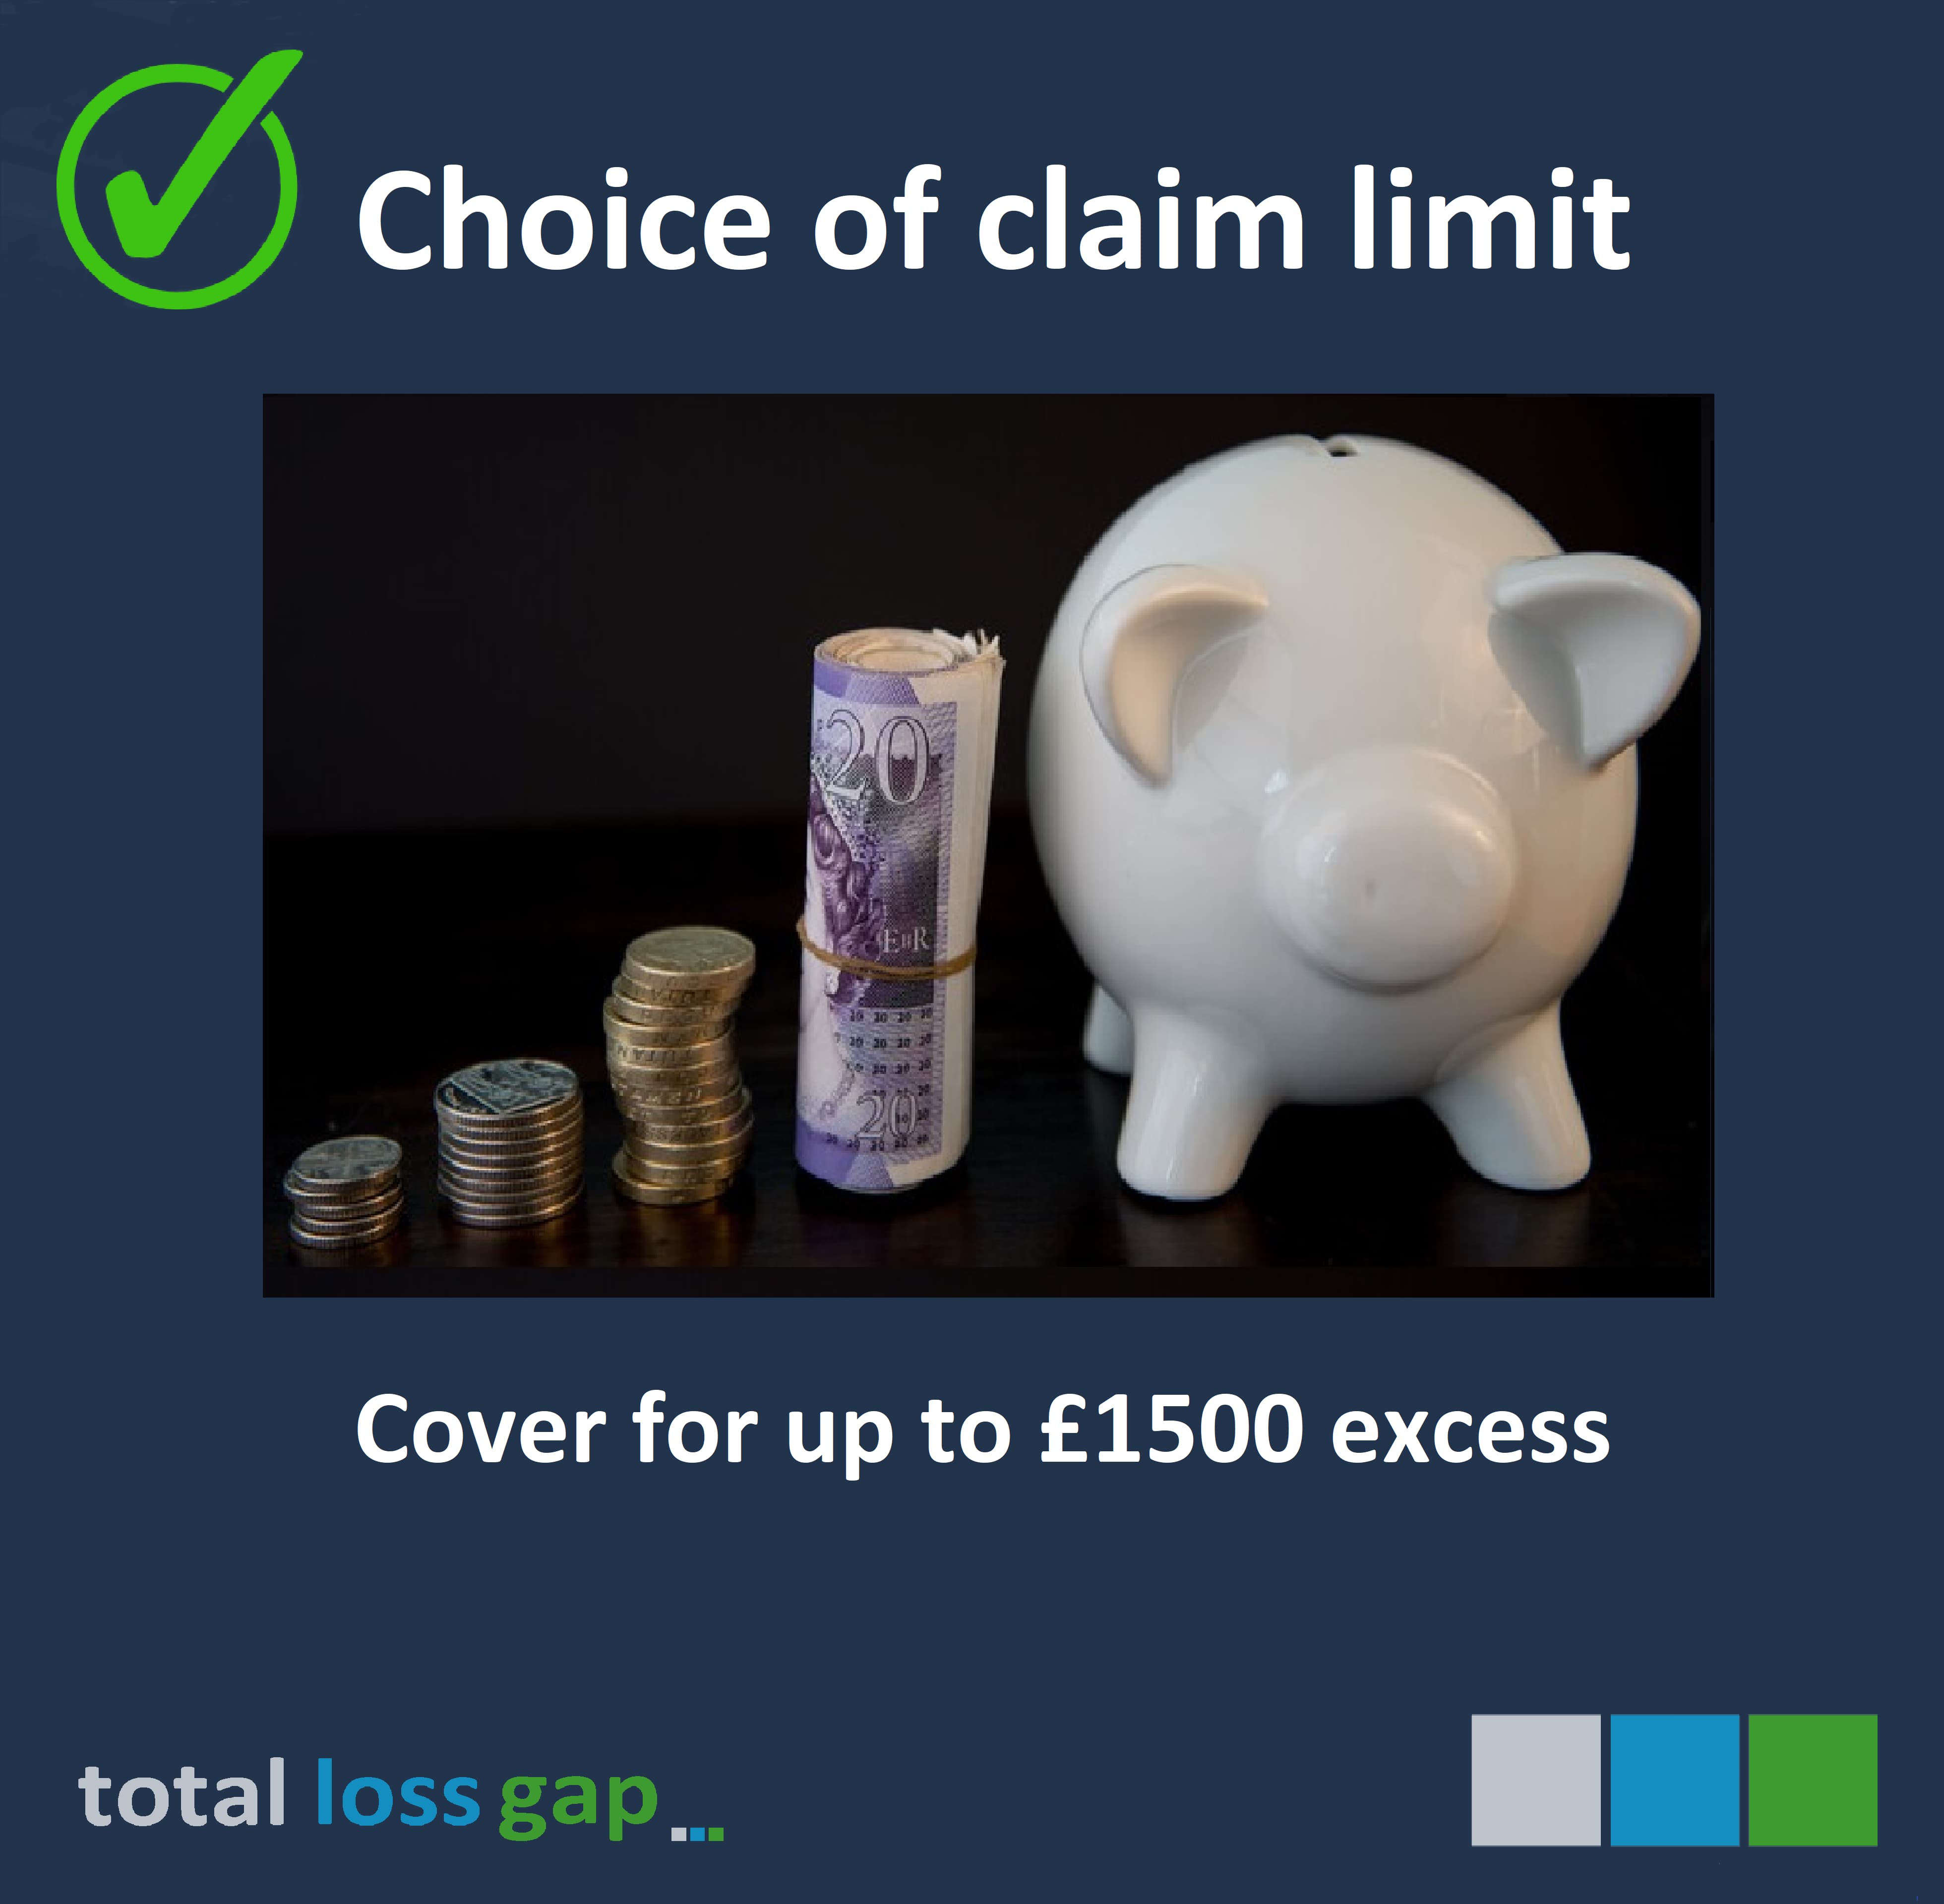 There is a choice of excess claims limits